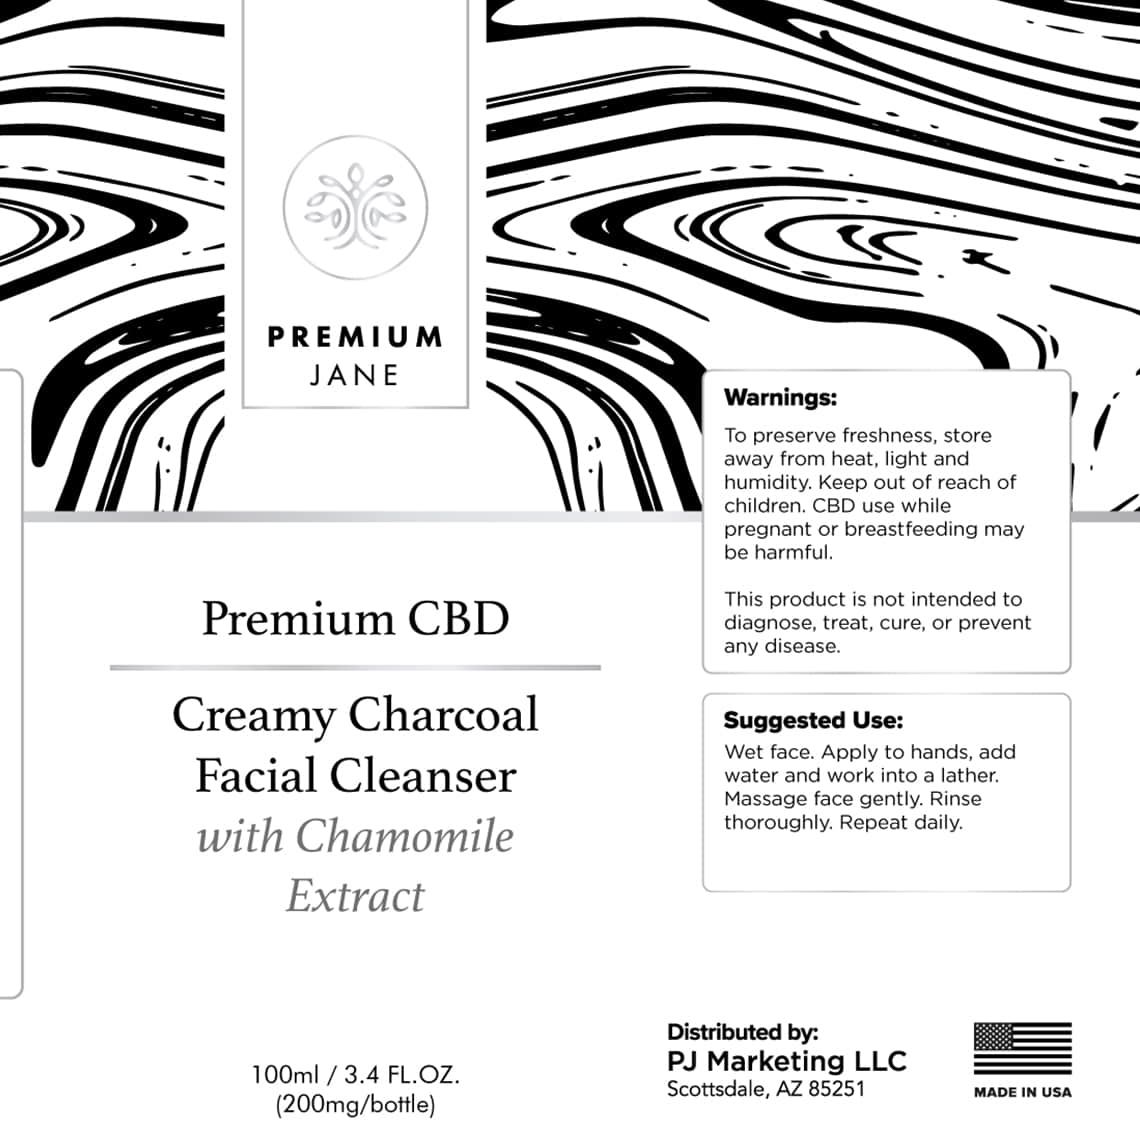 pj-product-page-200mg-cbd-creamy-charcoal-facial-cleanser-4-min - preview